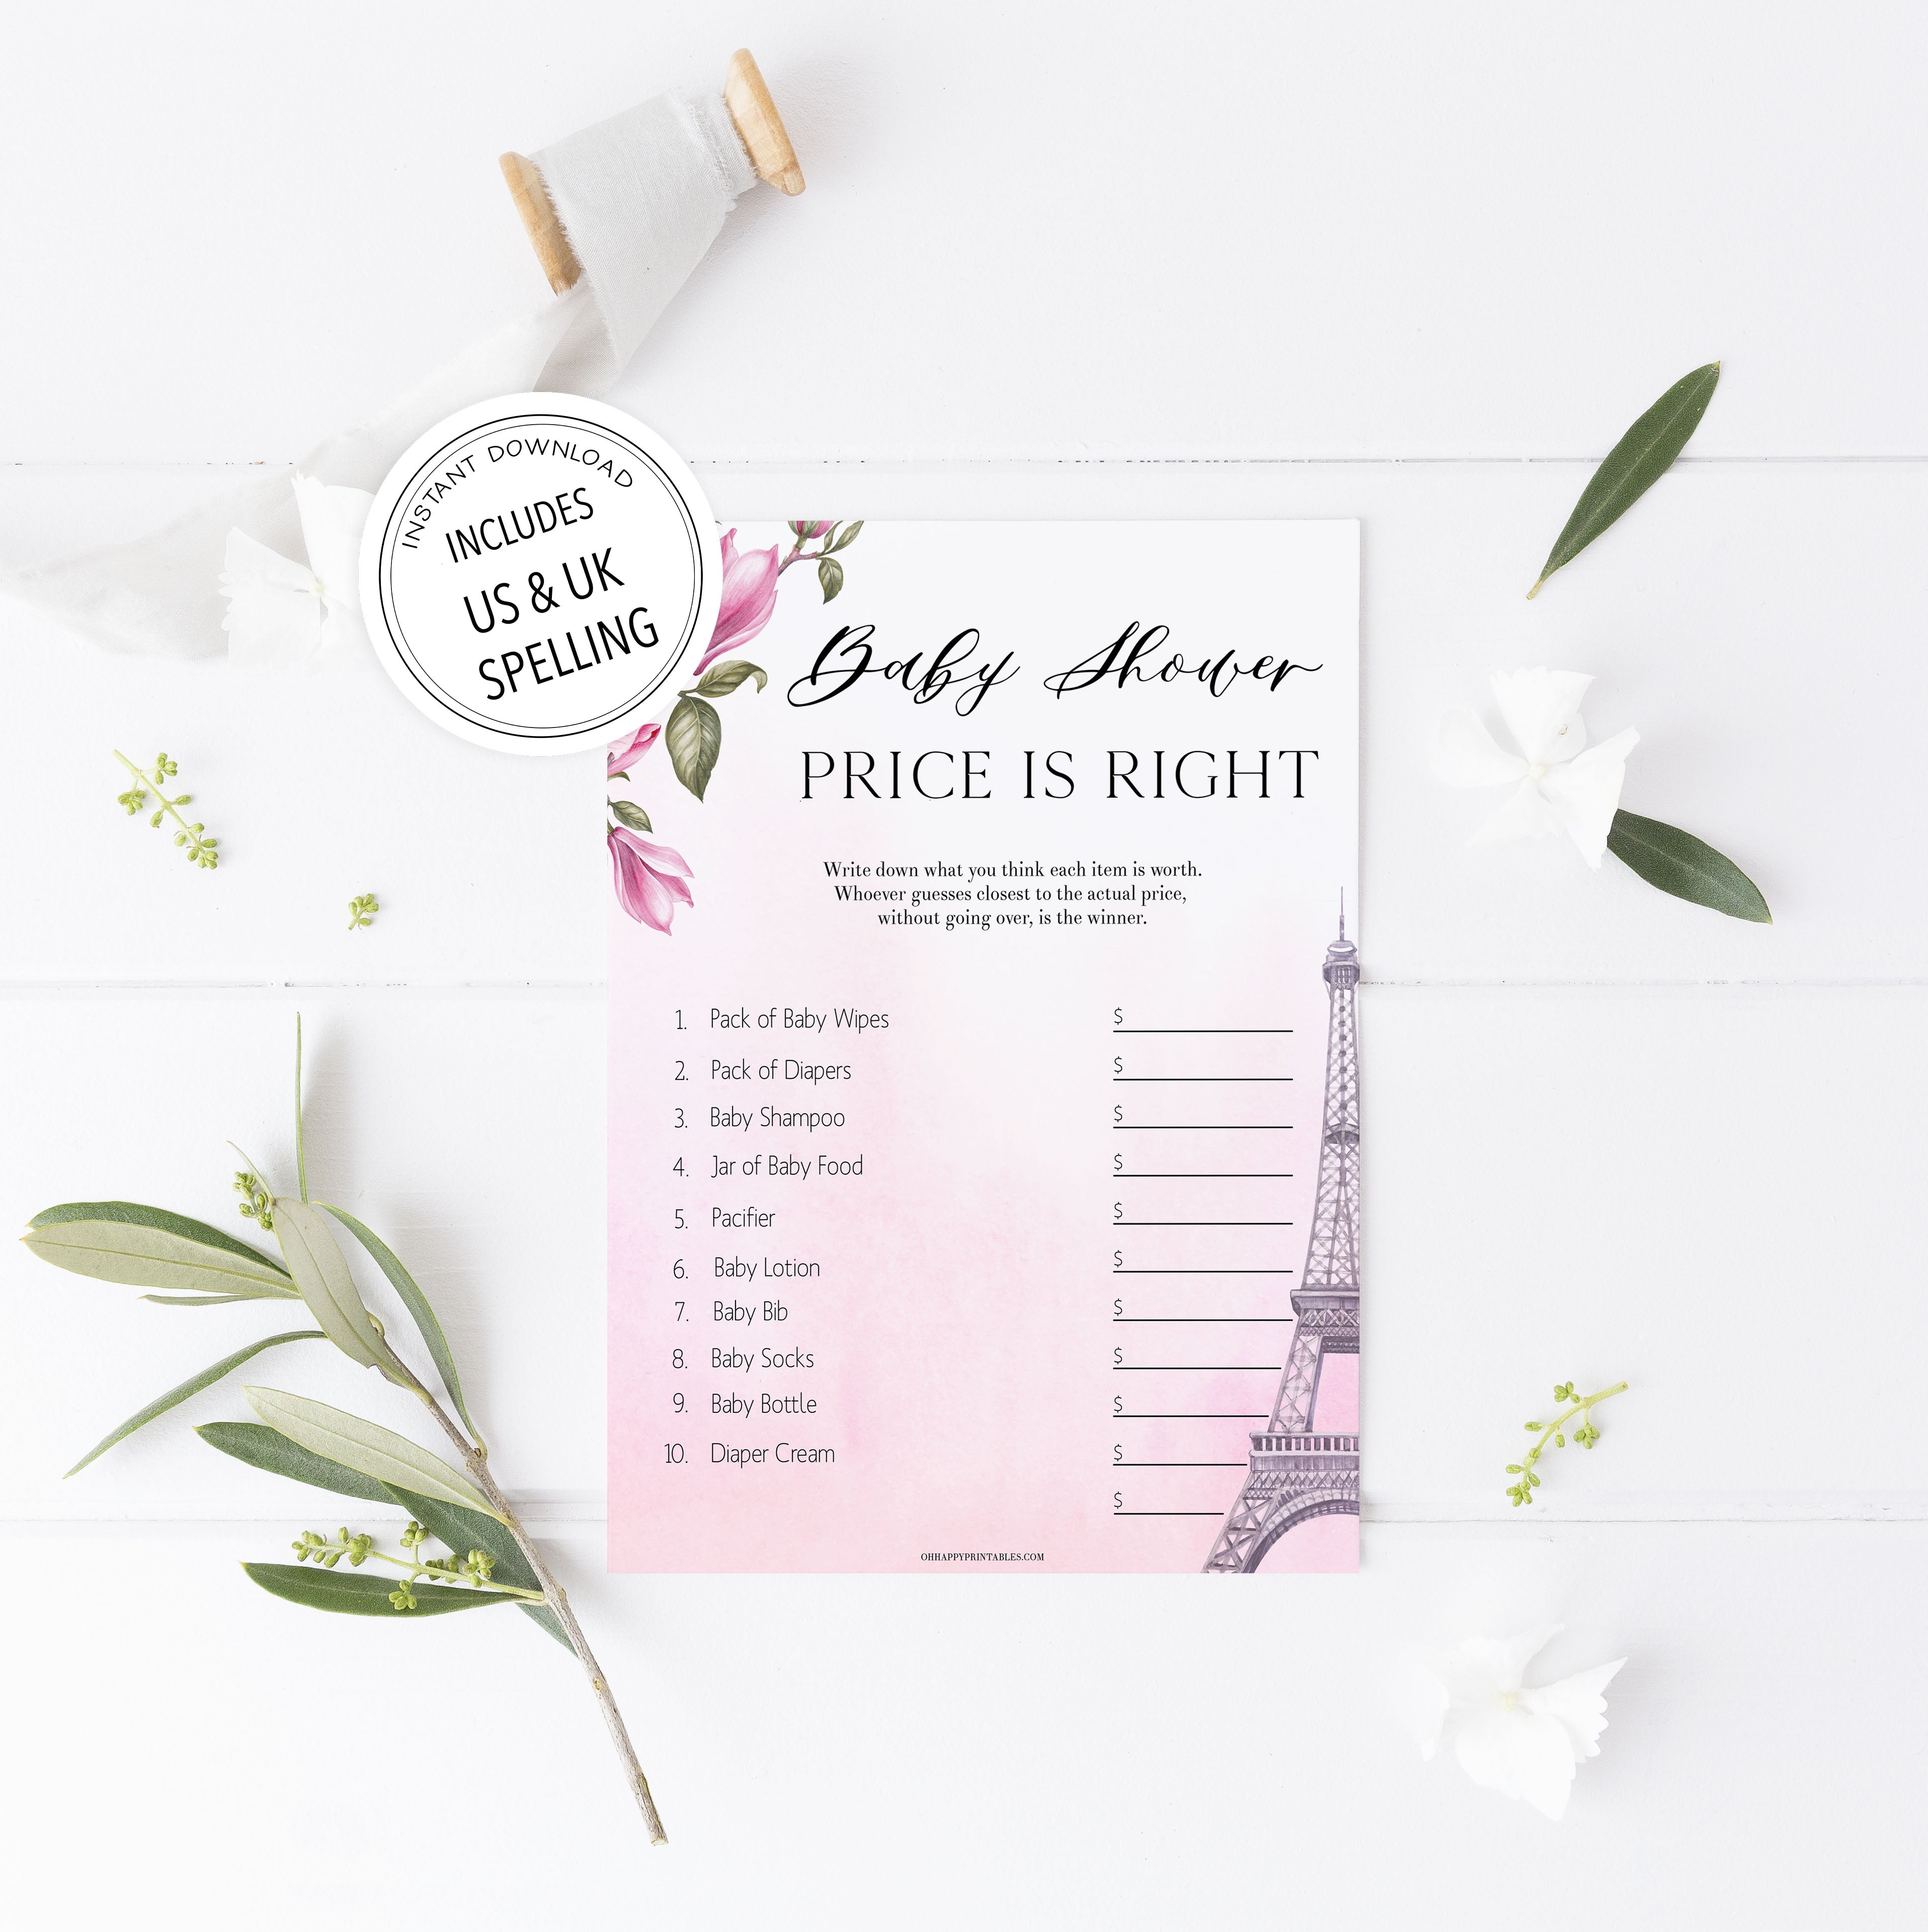 price is right baby shower game, Paris baby shower games, printable baby shower games, Parisian baby shower games, fun baby shower games